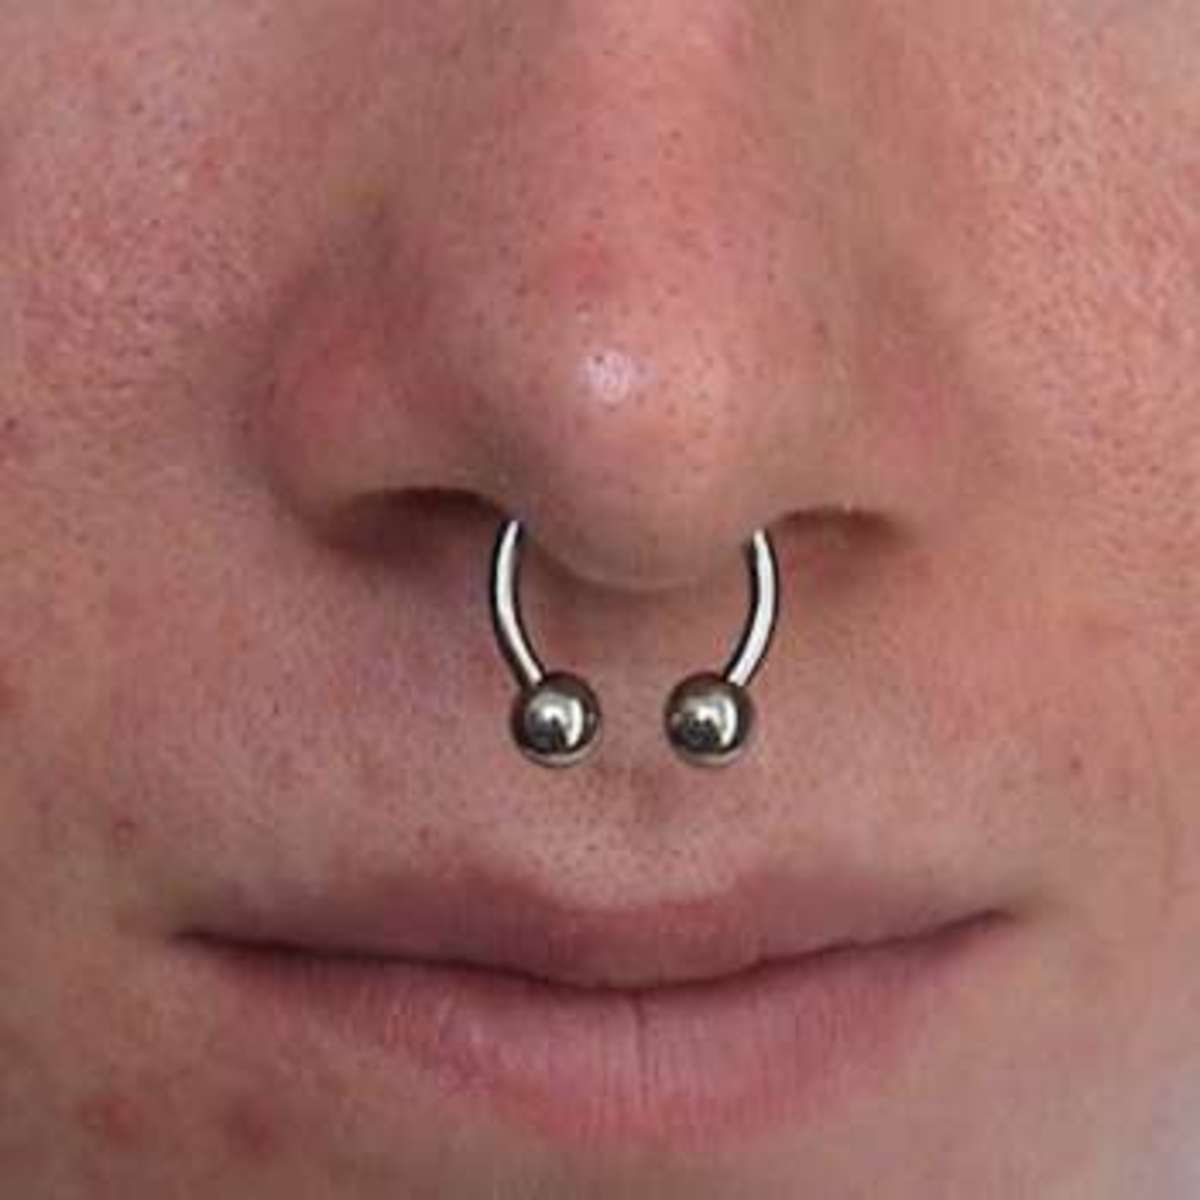 A nose with a septum piercing.